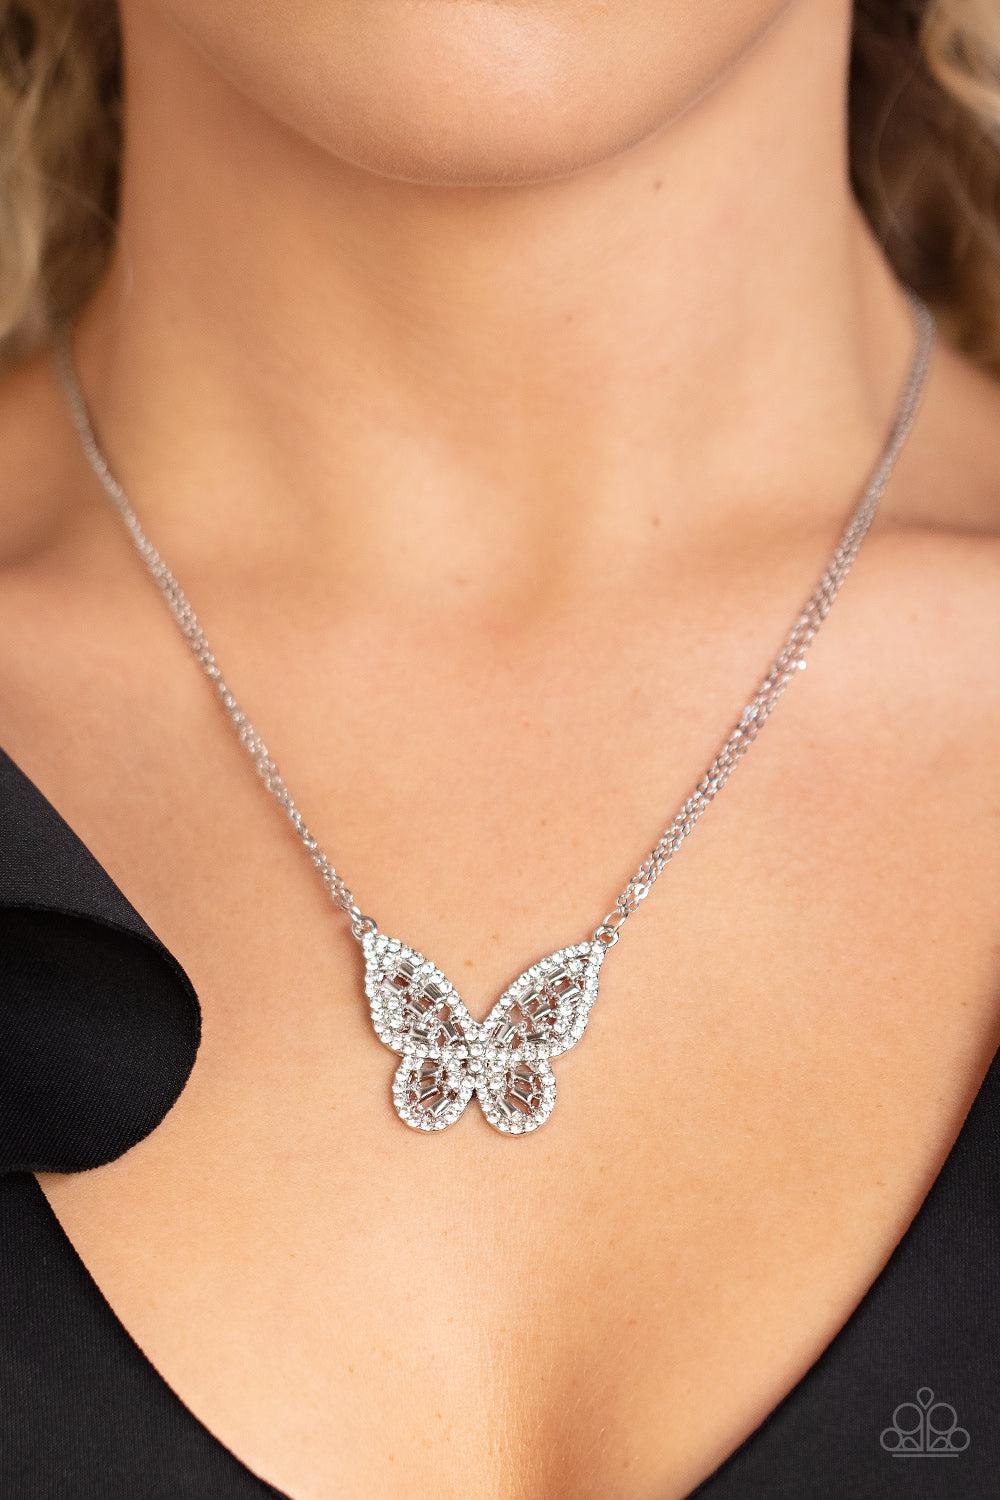 Baroque Butterfly White Rhinestone Necklace - Paparazzi Accessories-on model - CarasShop.com - $5 Jewelry by Cara Jewels